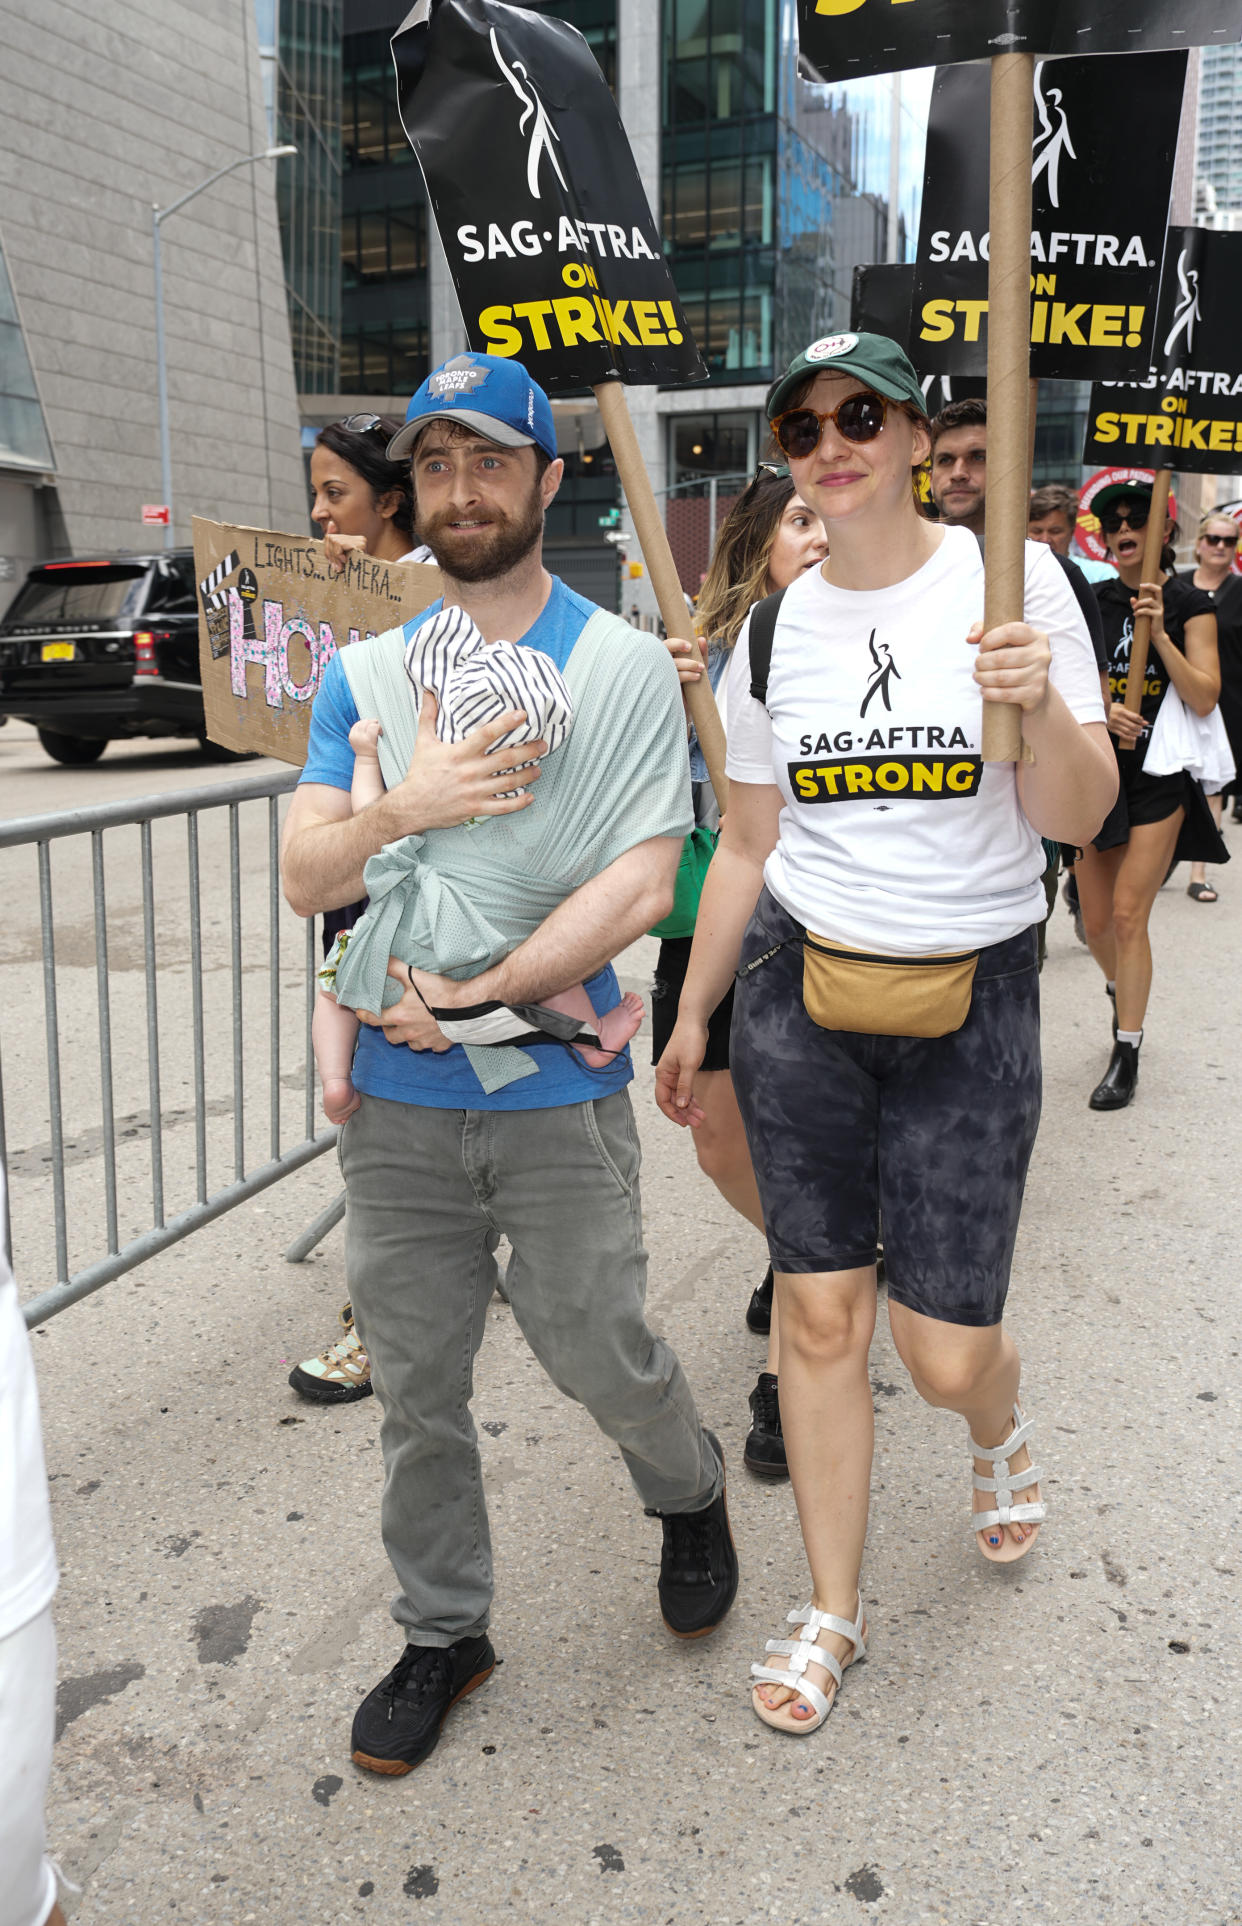 Daniel Radcliffe and Erin Darke join the picket line in New York City on July 21, 2023. (John Nacion / Getty Images)